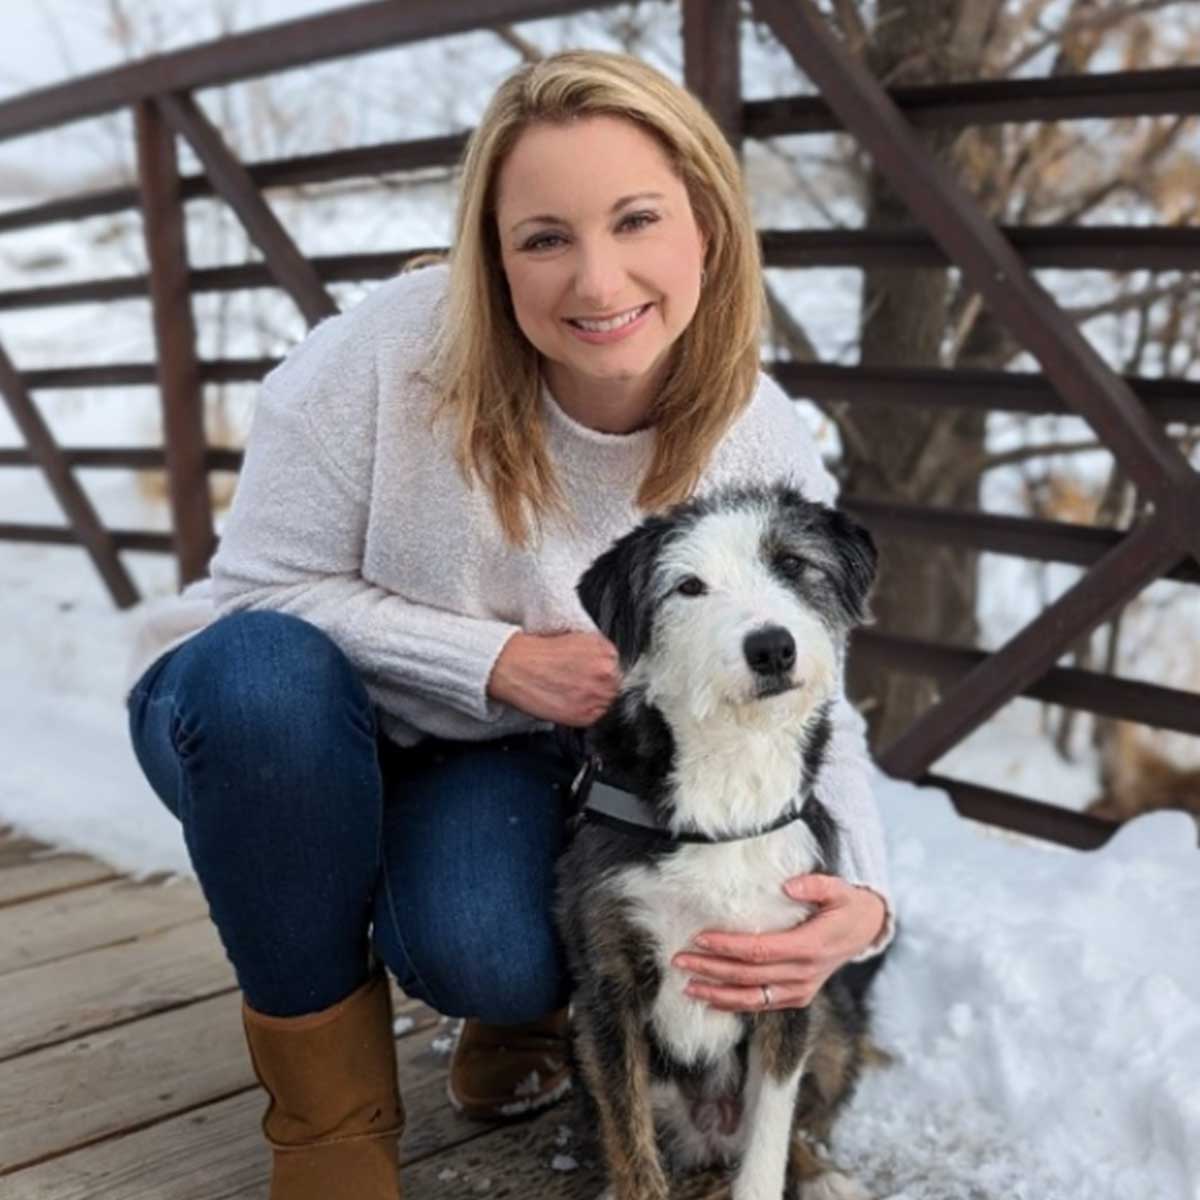 Lara Jerzycki, PT, DPT, ATC did her undergraduate schooling at the University of Colorado at Boulder (Go Buffs!), receiving degrees in Kinesiology and Sociology; she then went on to Regis University where she received her Doctorate in Physical Therapy. 